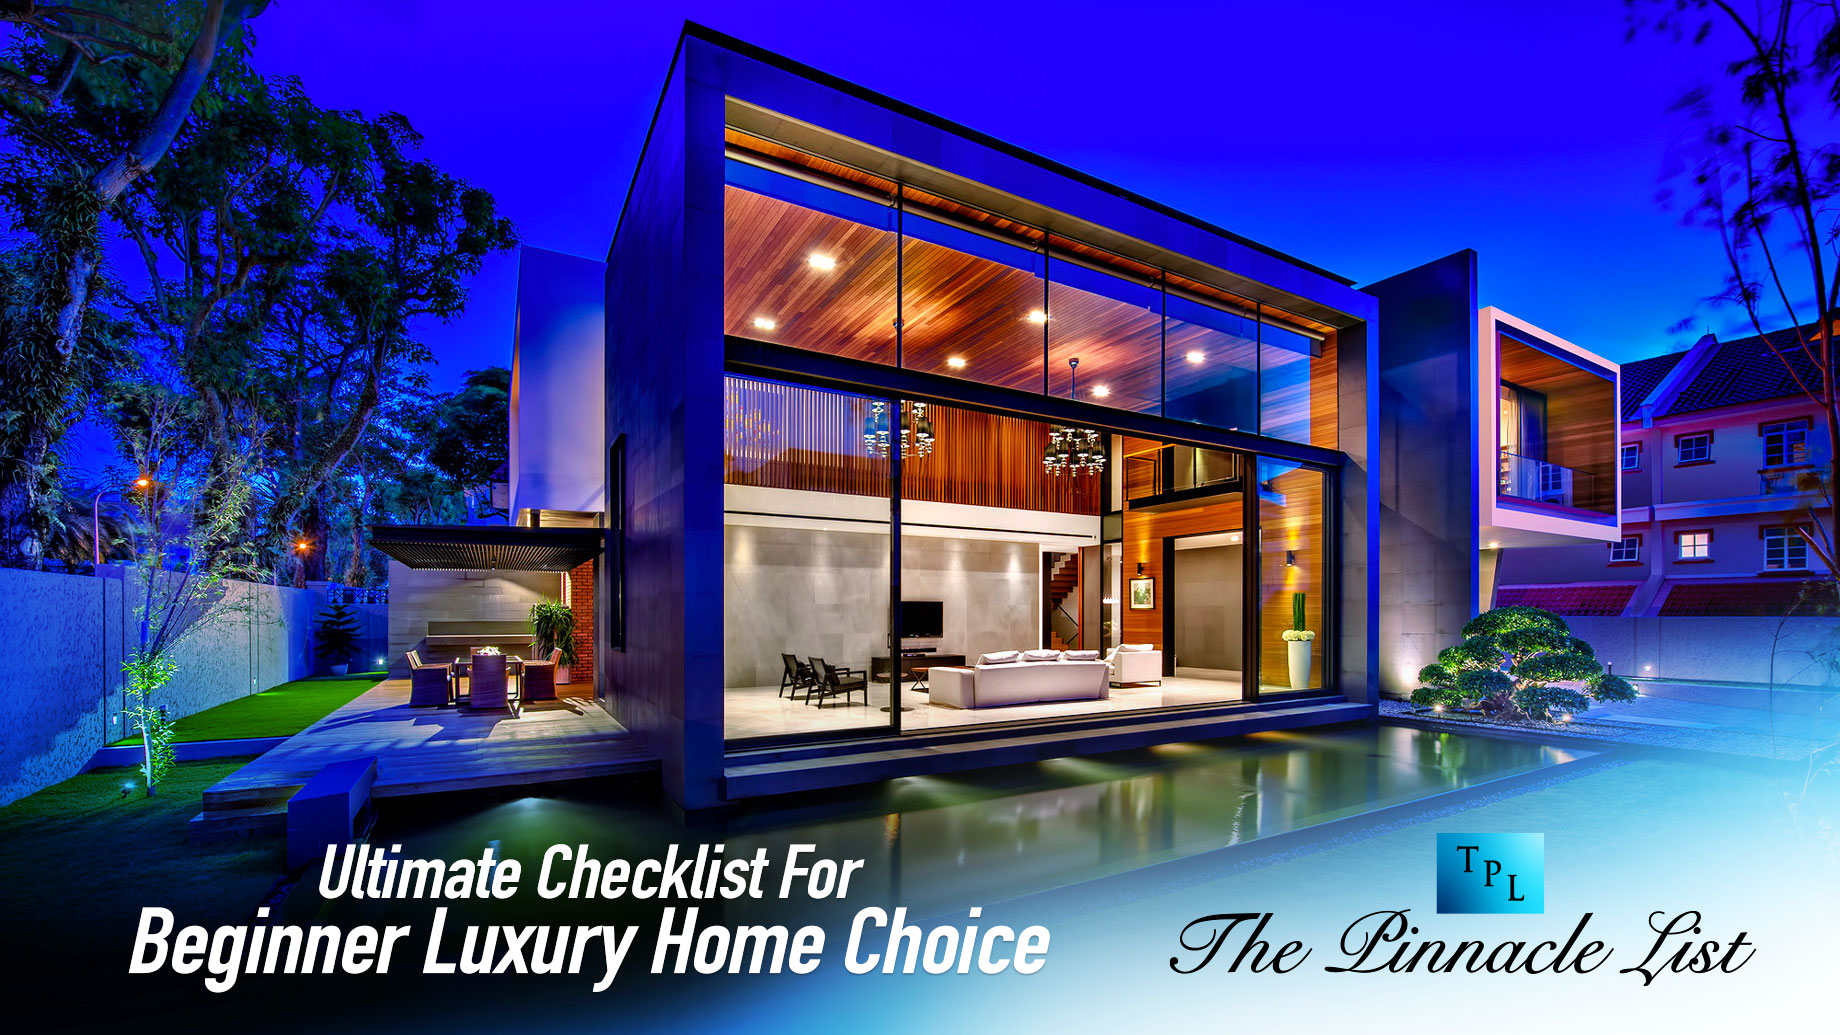 Ultimate Checklist For Beginner Luxury Home Choice